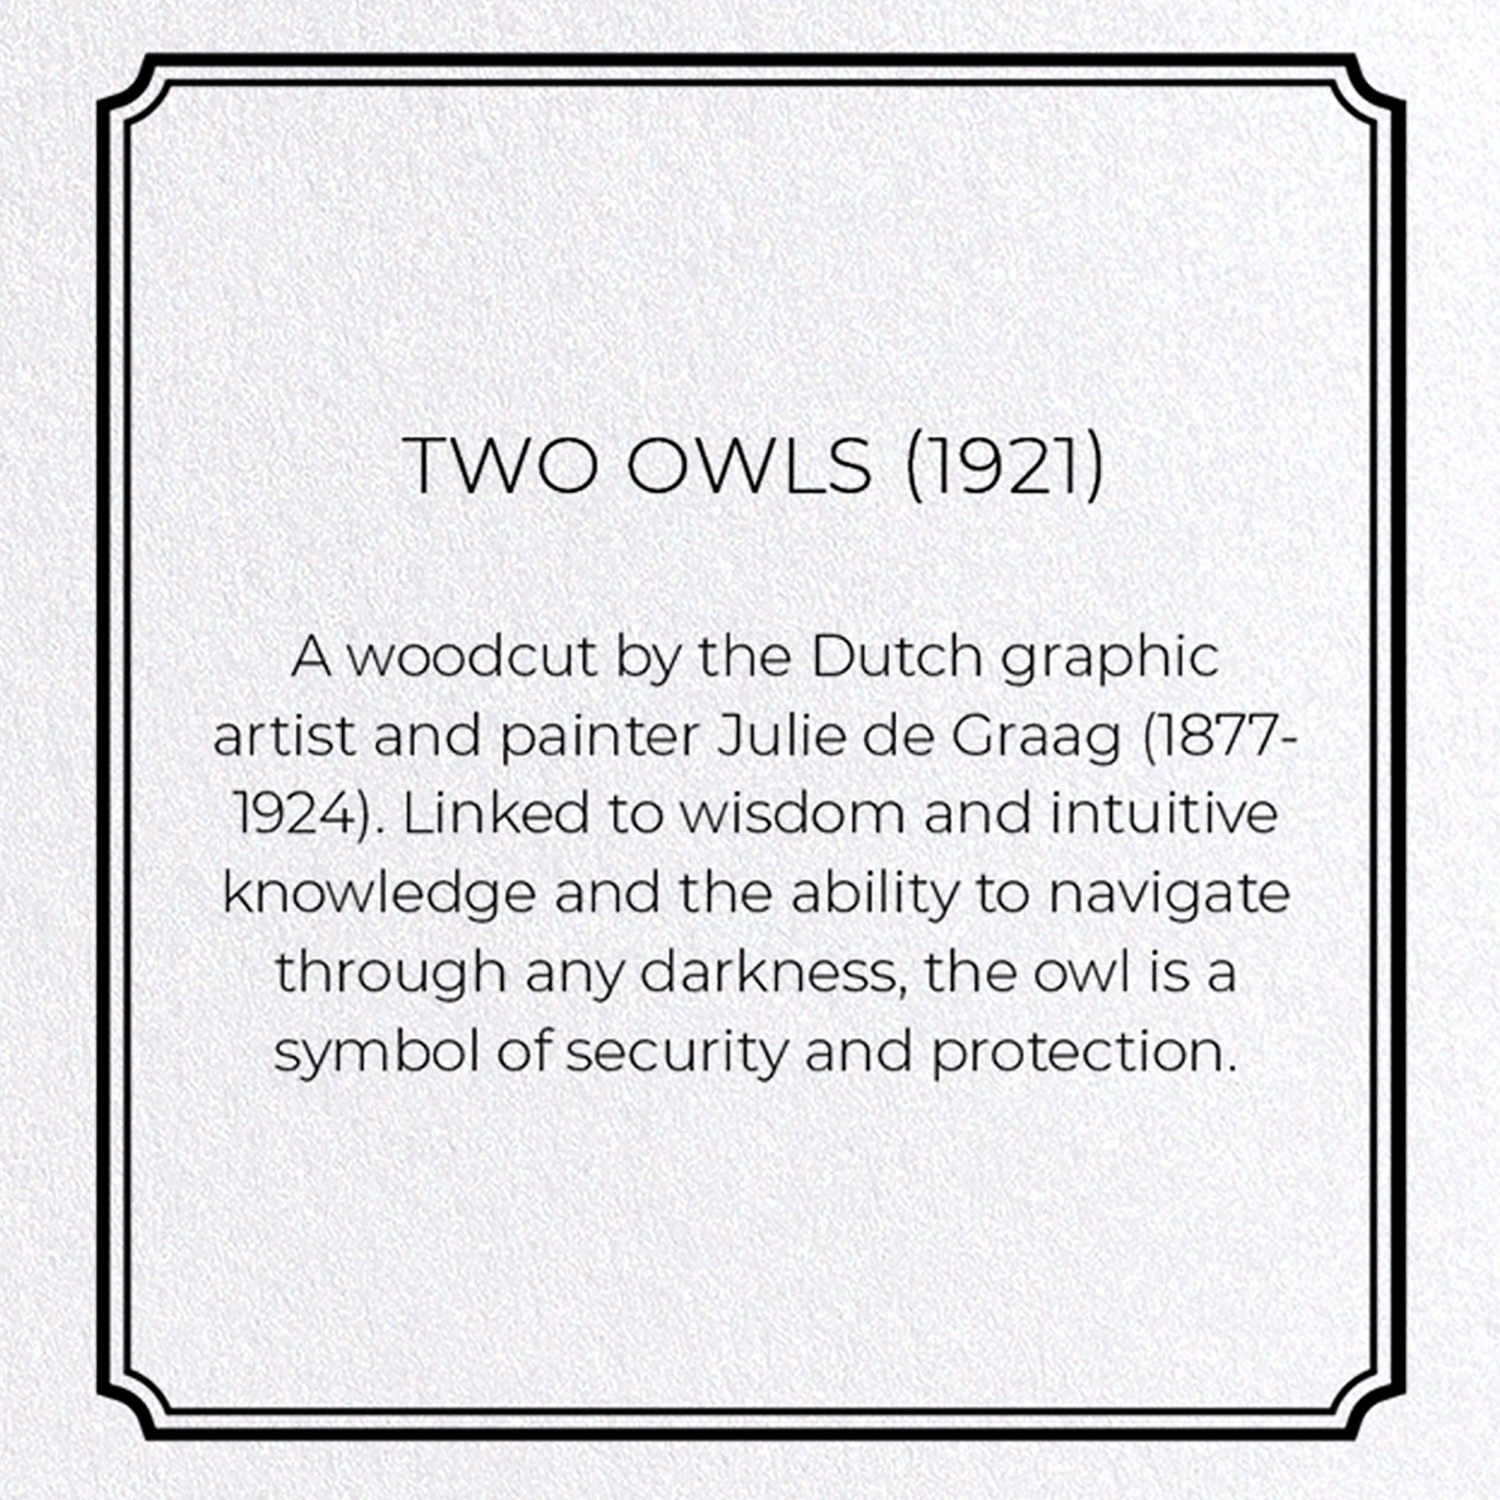 TWO OWLS (1921)